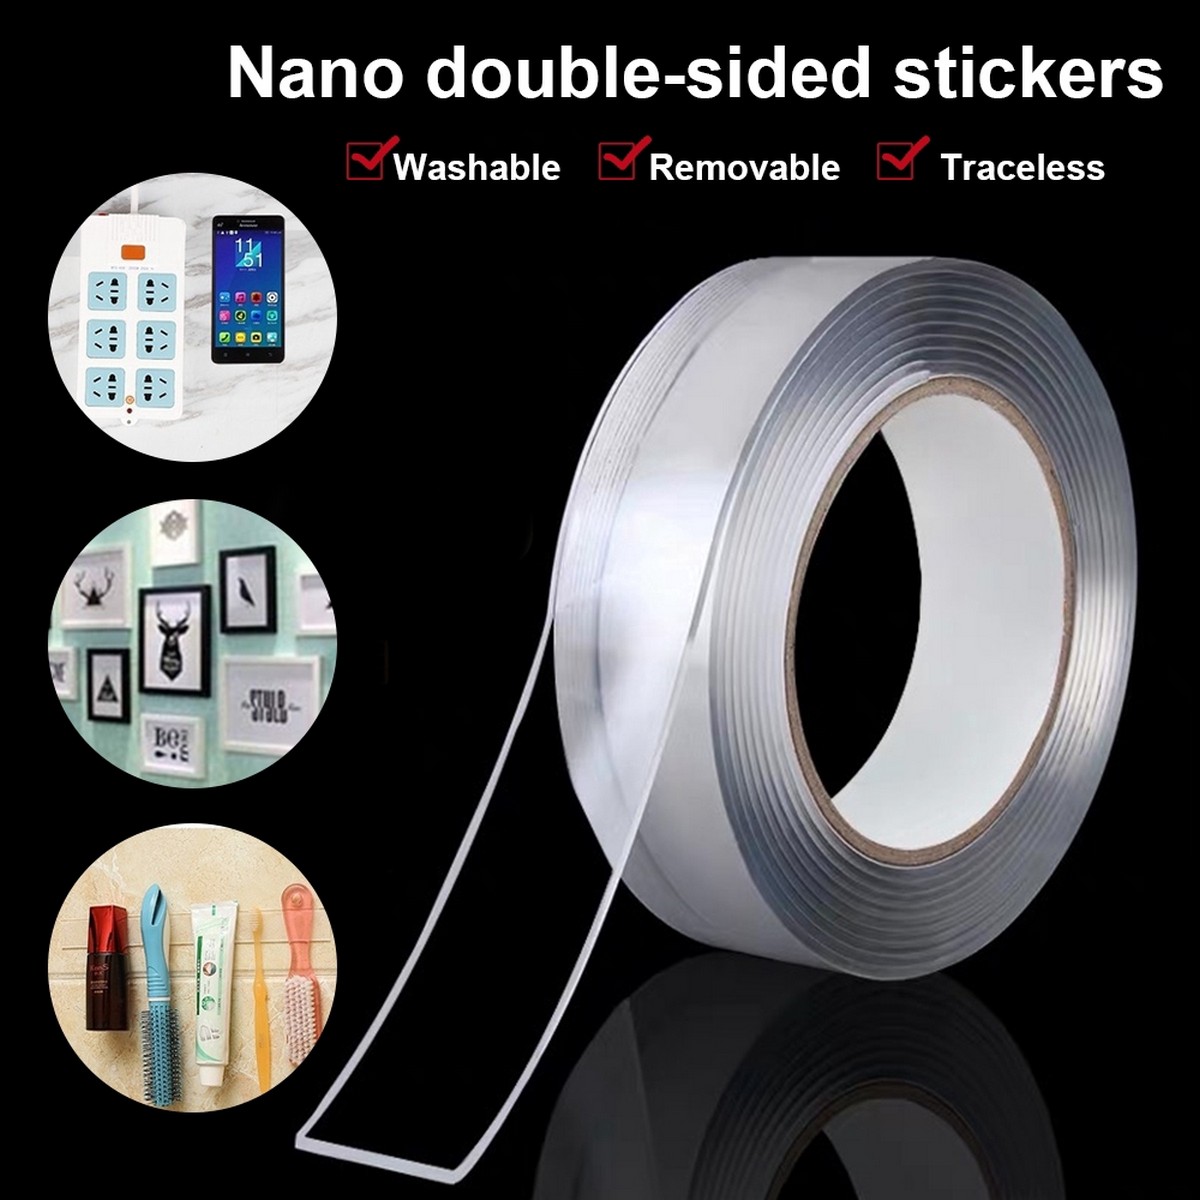 5 Meter Double Sided Transparent Magic Nano Tape Buy Online At Best Prices In Pakistan Daraz Pk